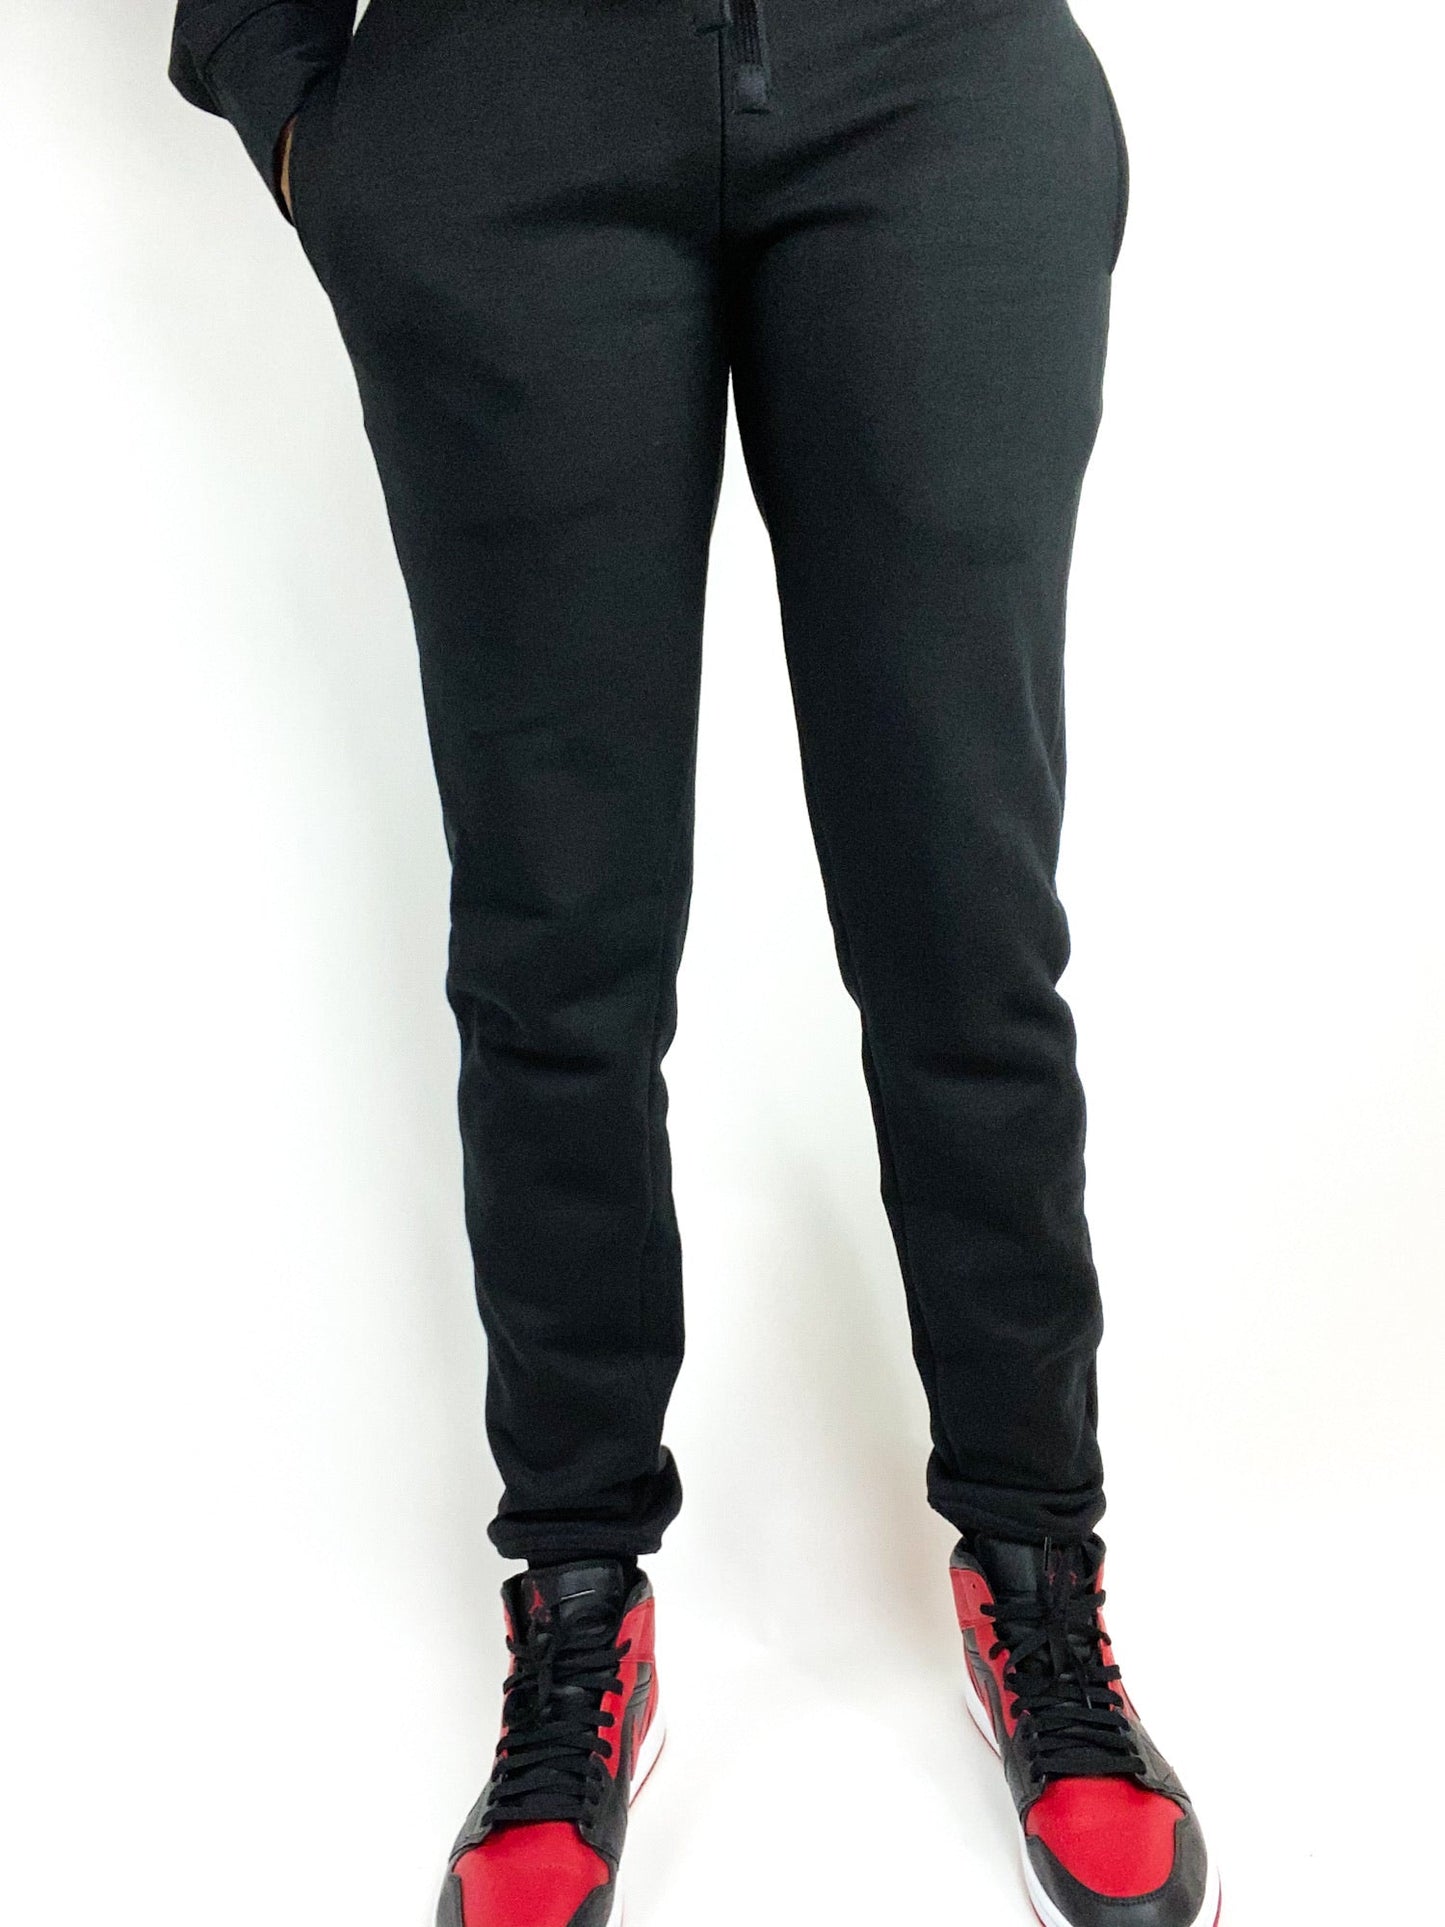 Tall Unisex Black Sweatpants ( Pre Order Only)